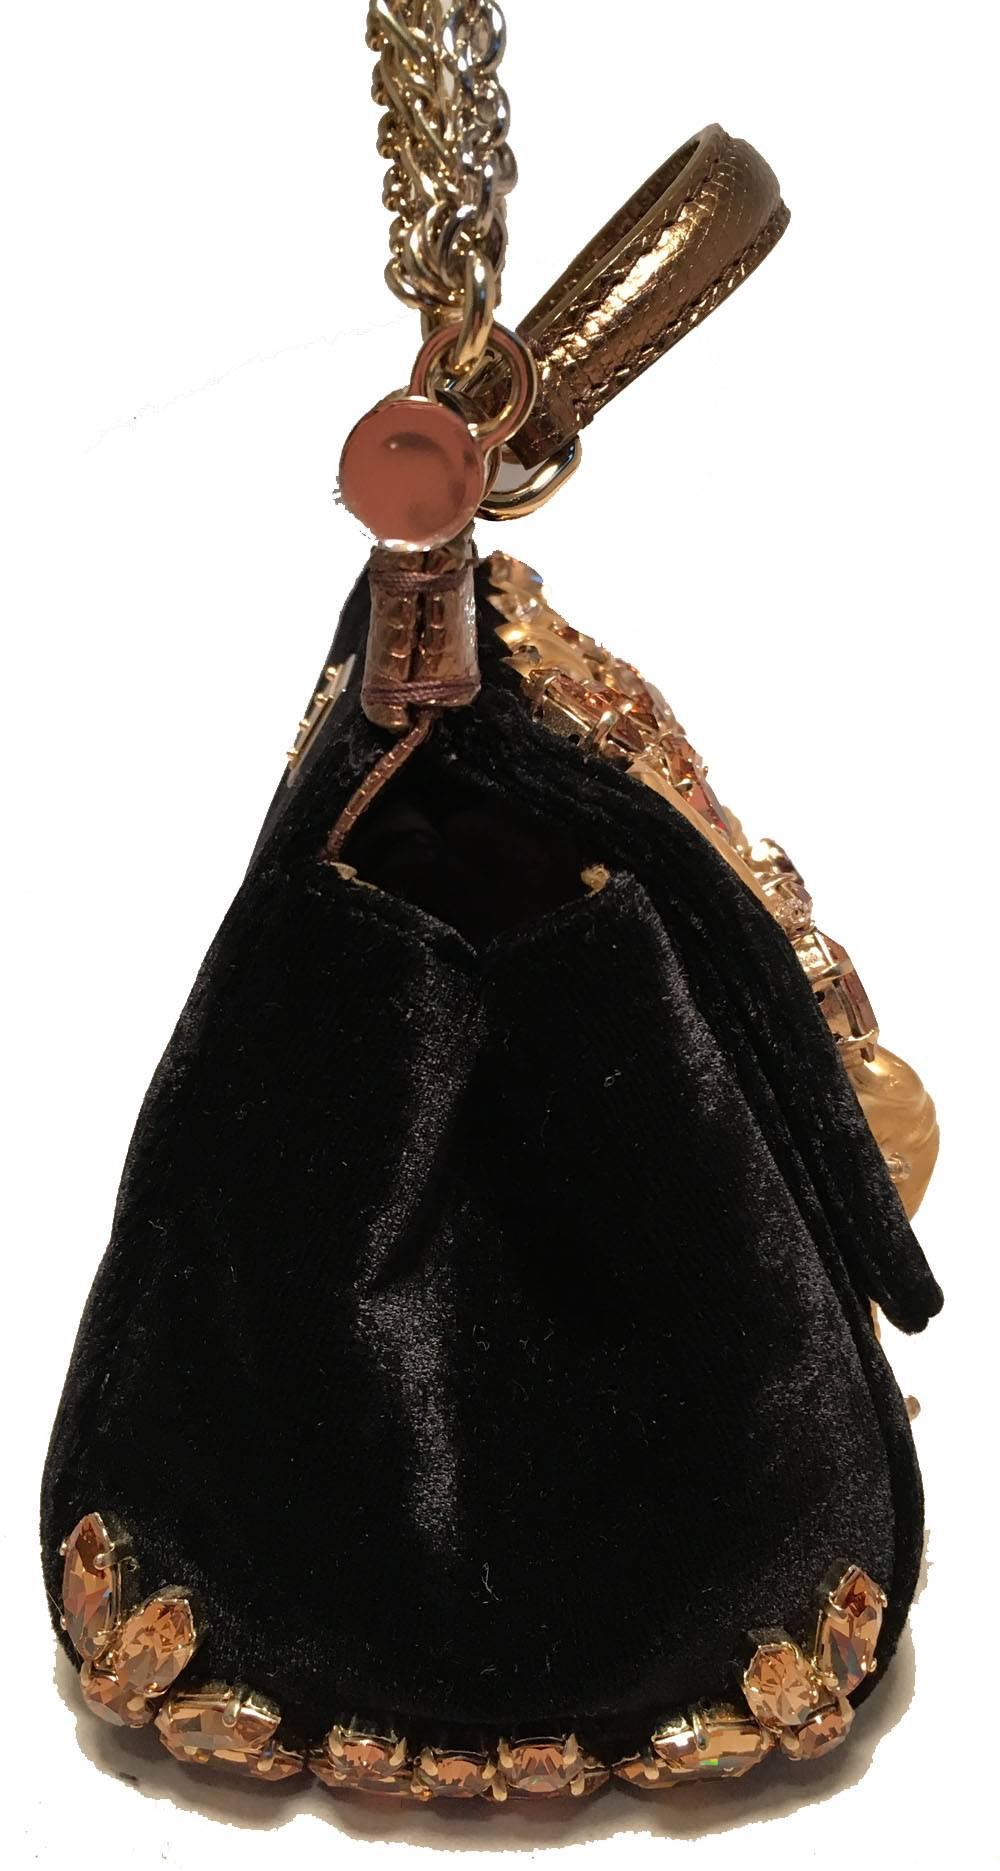 Absolutely stunning Dolce and Gabbana Limited Edition Black Velvet Alta Moda Sofia Sophia Loren Handbag in excellent condition.  Black velvet exterior trimmed with gold hardware and rhinestone embellishments throughout.  Lightweight multiple gold